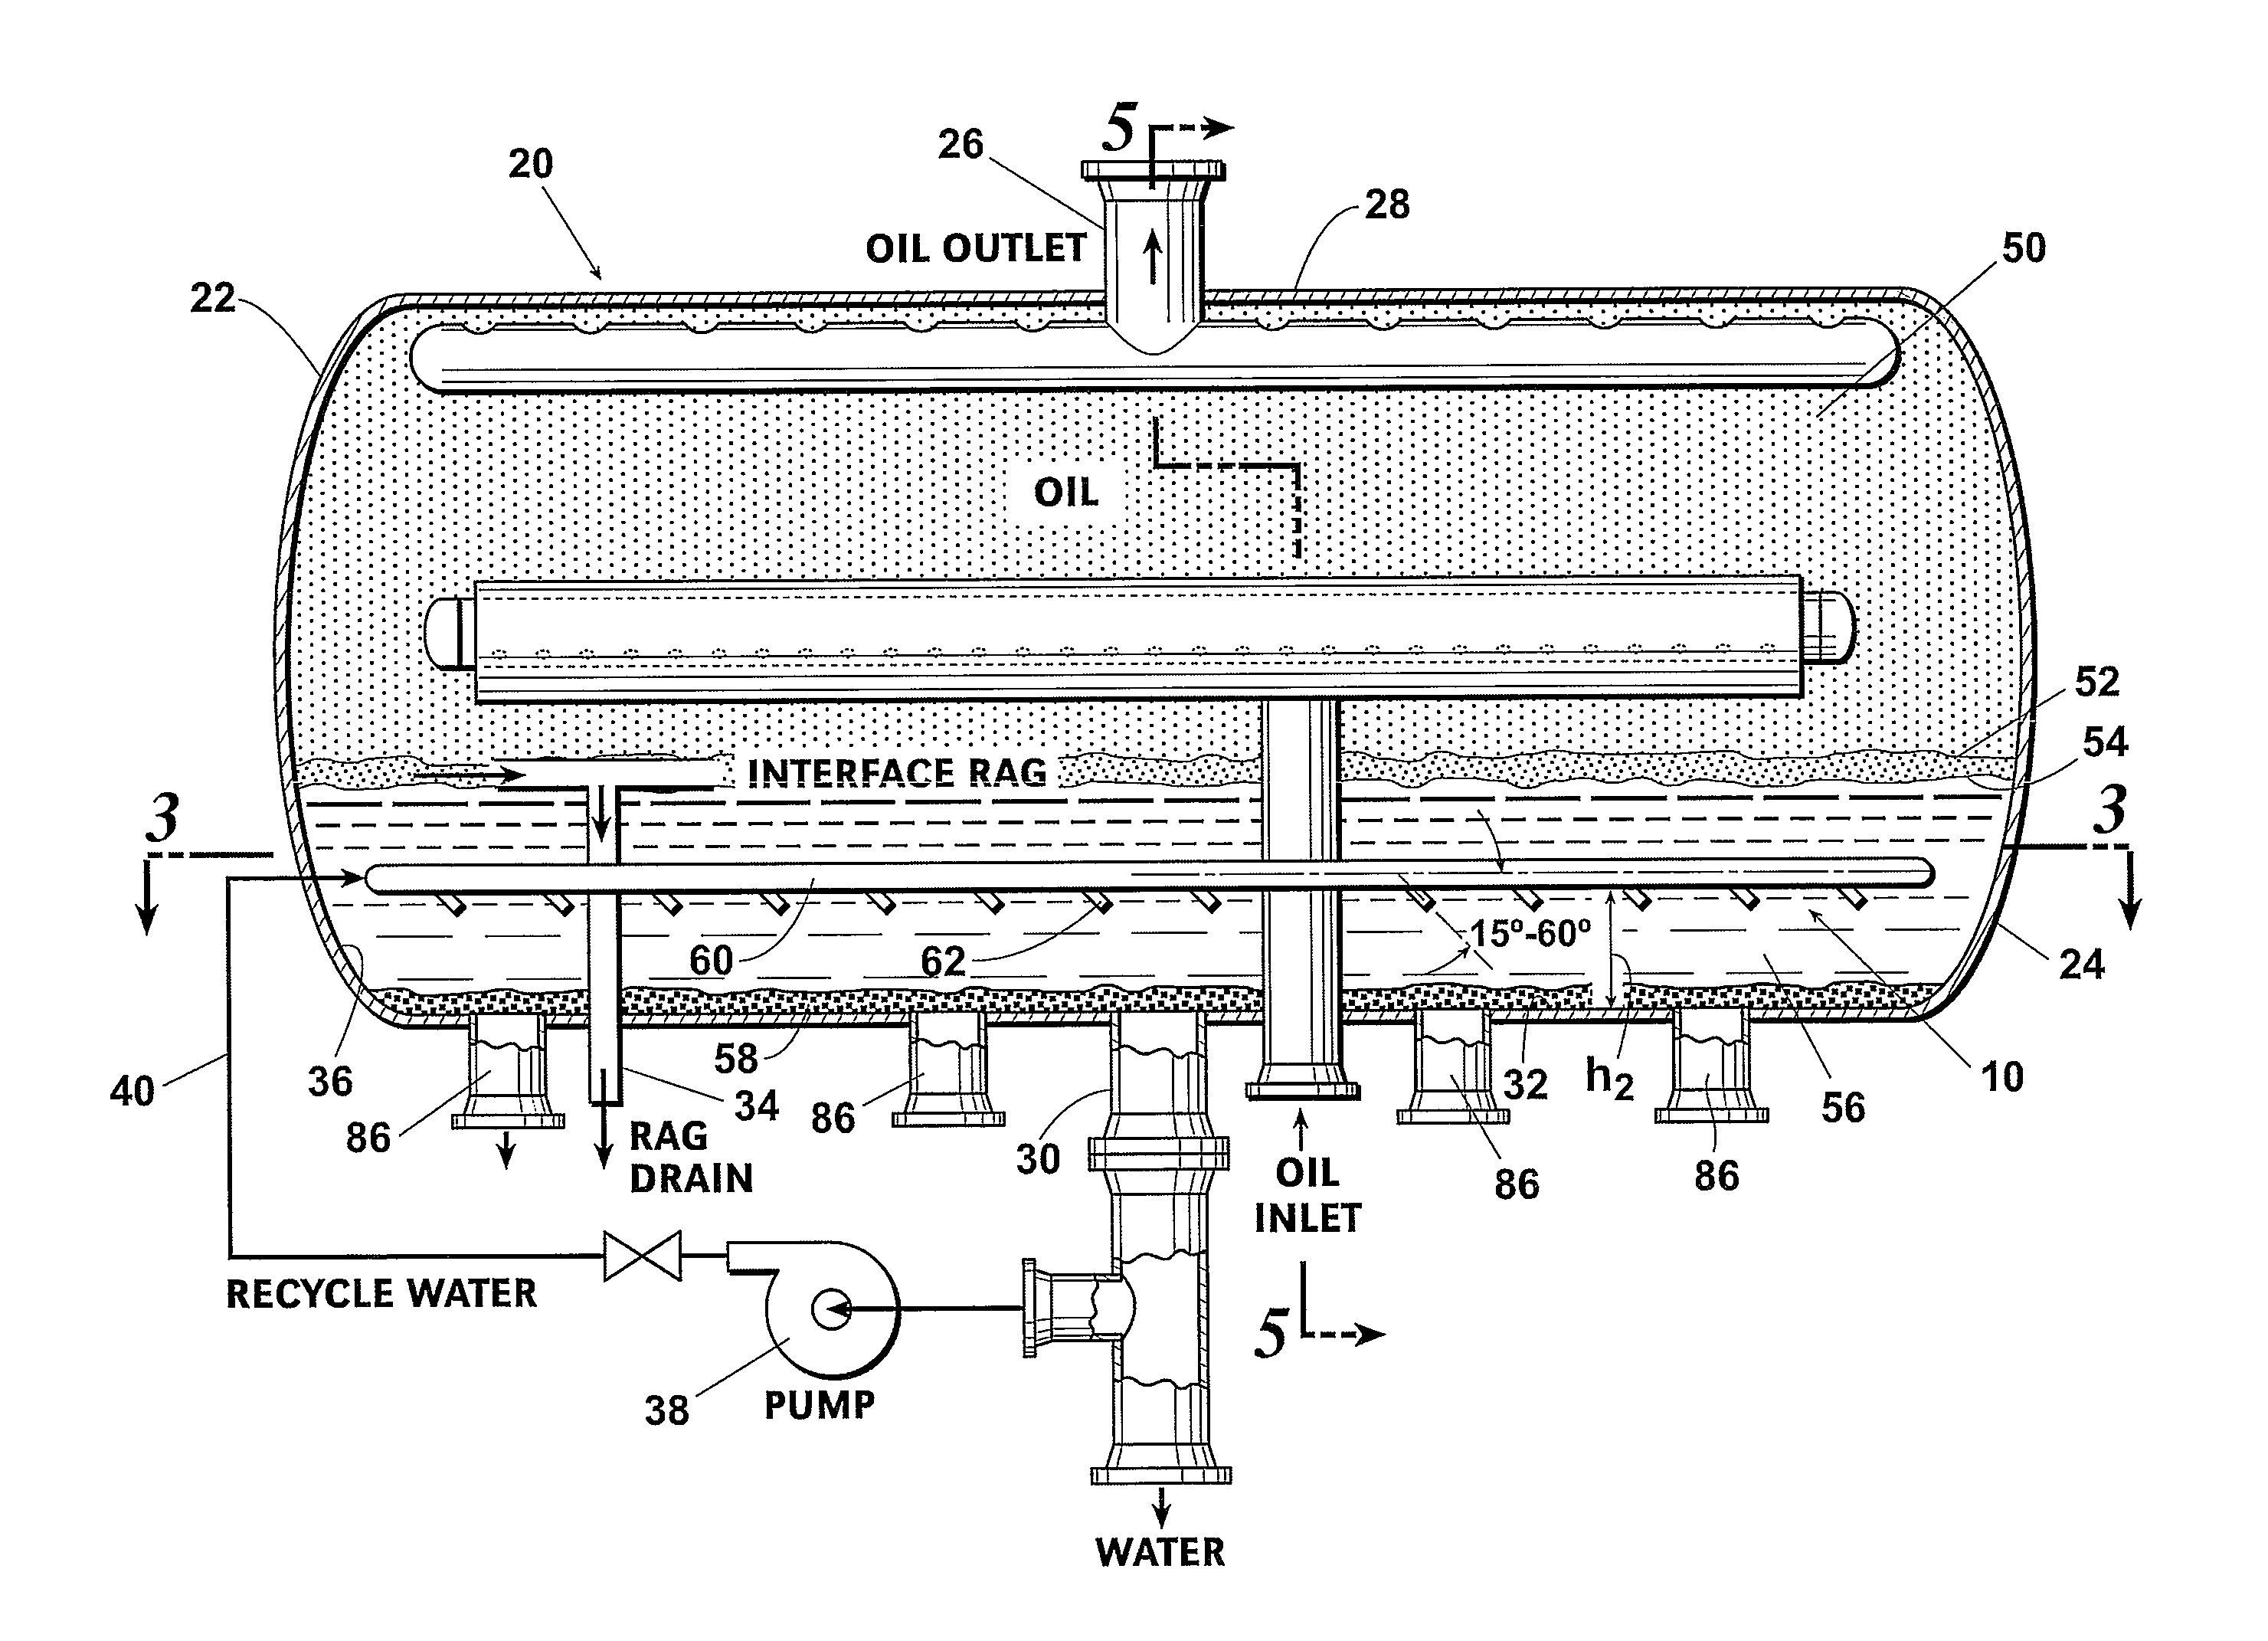 Interface and Mud Control System and Method for Refinery Desalters